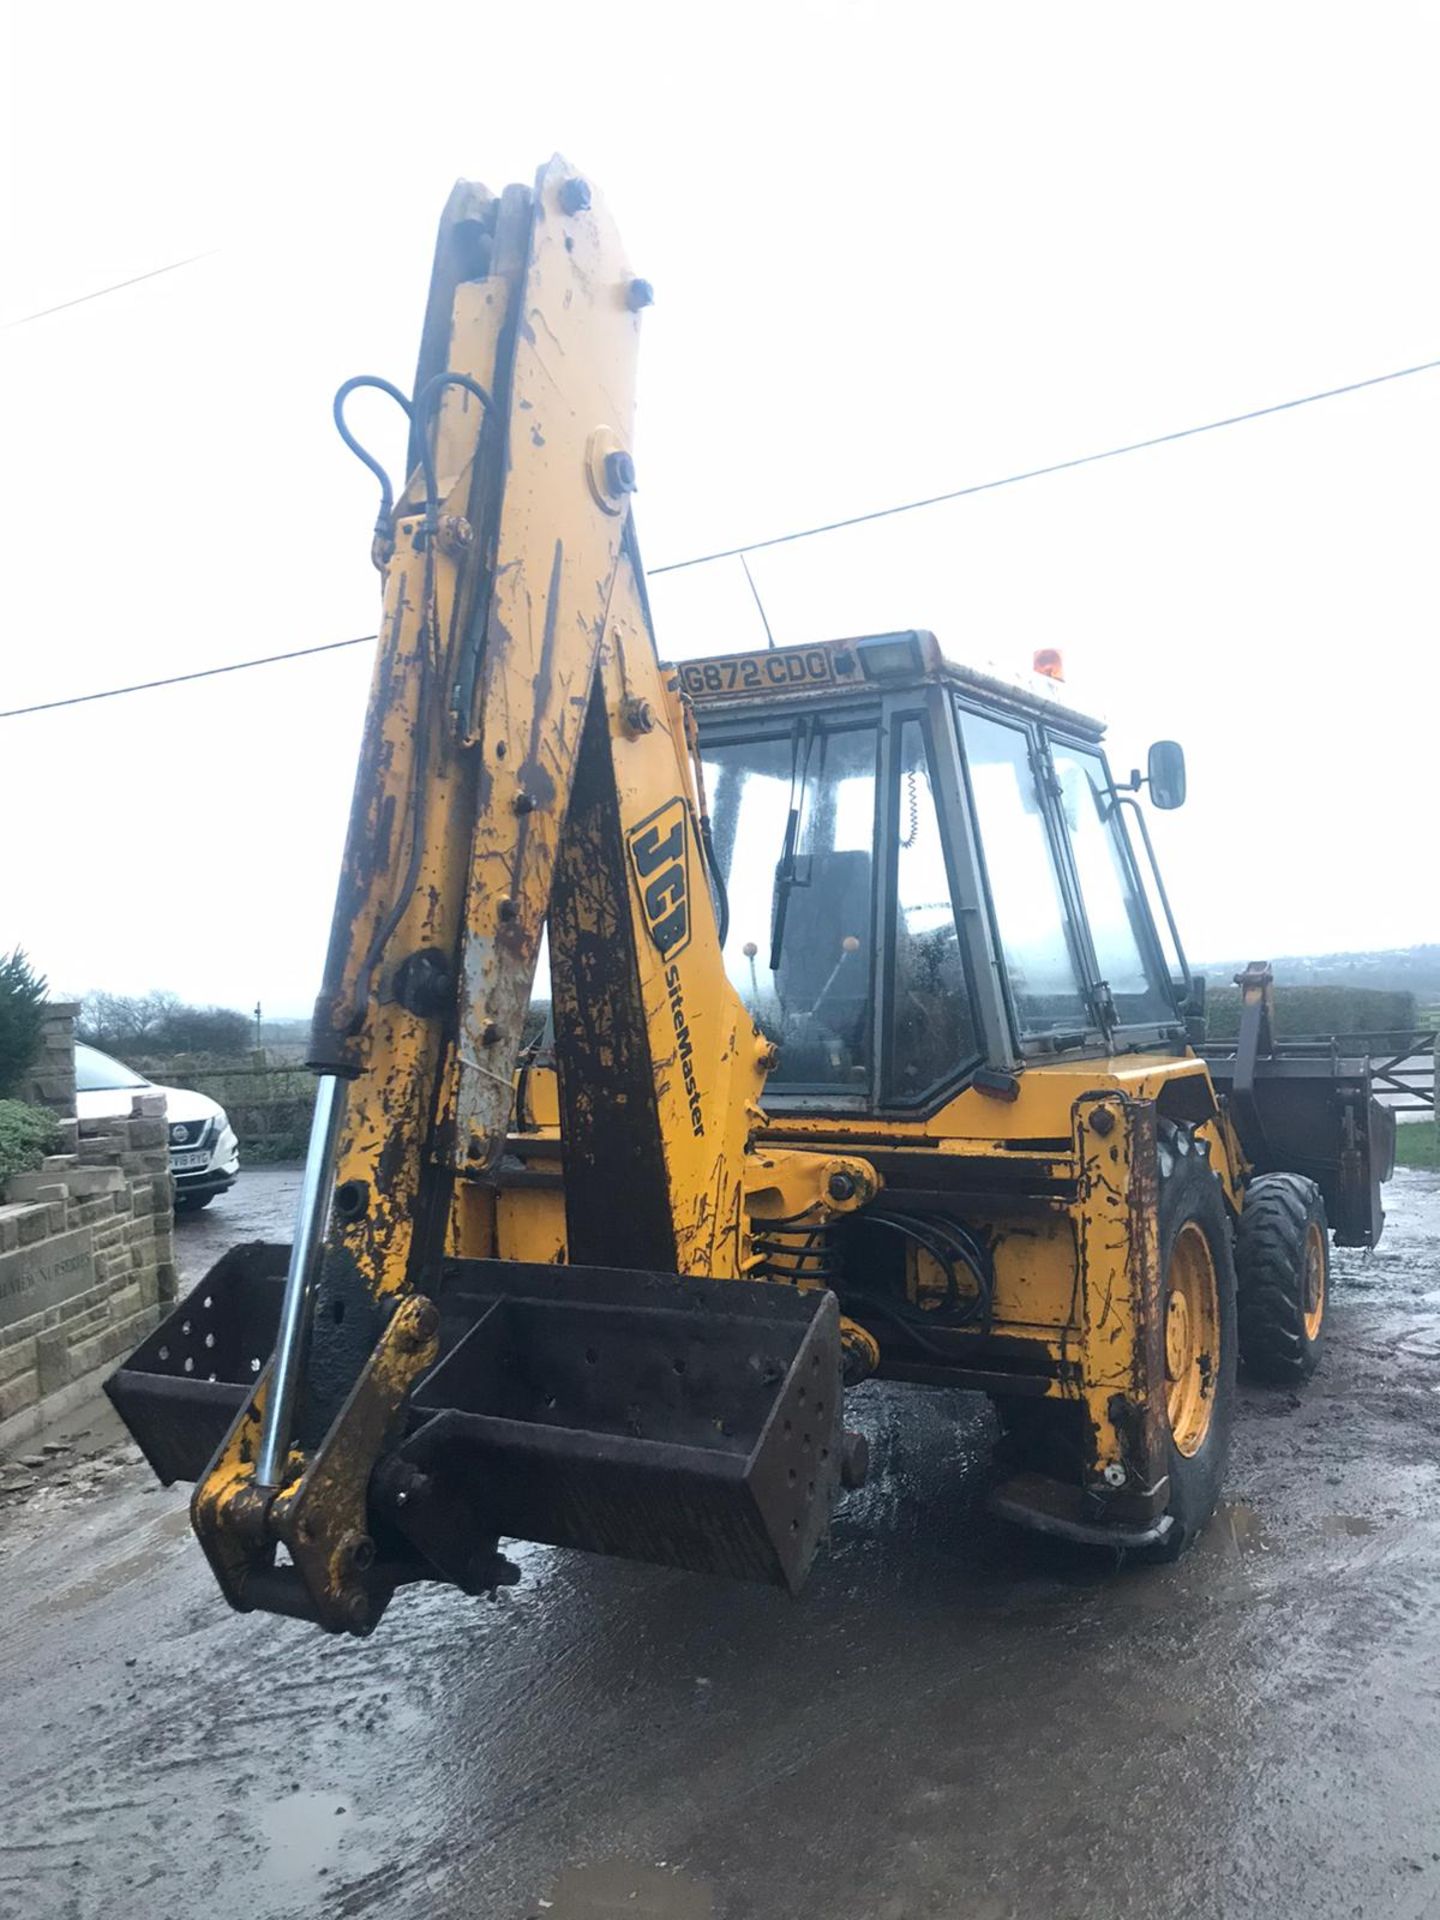 JCB 3CX SITEMASTER, 4 WHEEL DRIVE, EXTRA DIG, 4-IN-1 BUCKET, C/W 3 X BUCKETS, RUNS, WORKS & DIGS - Image 7 of 10